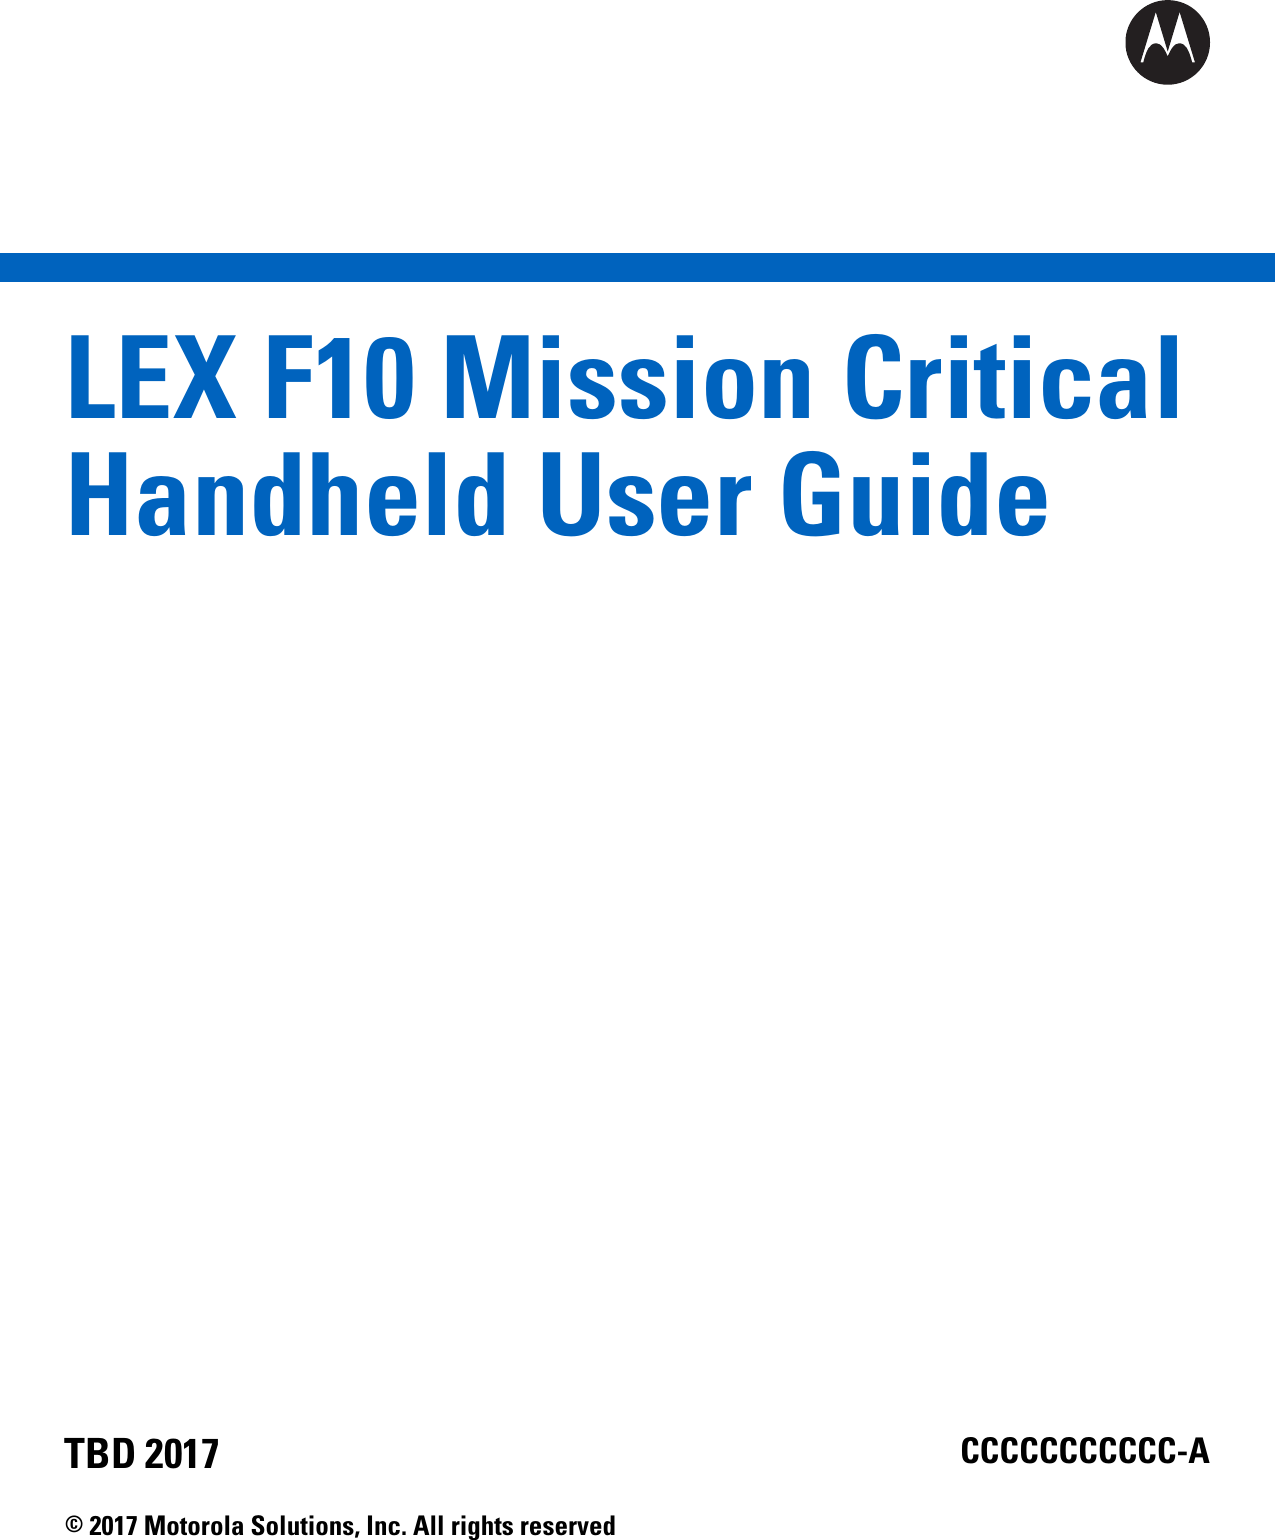 LEX F10 Mission CriticalHandheld User GuideCCCCCCCCCCC-ATBD 2017© 2017 Motorola Solutions, Inc. All rights reserved